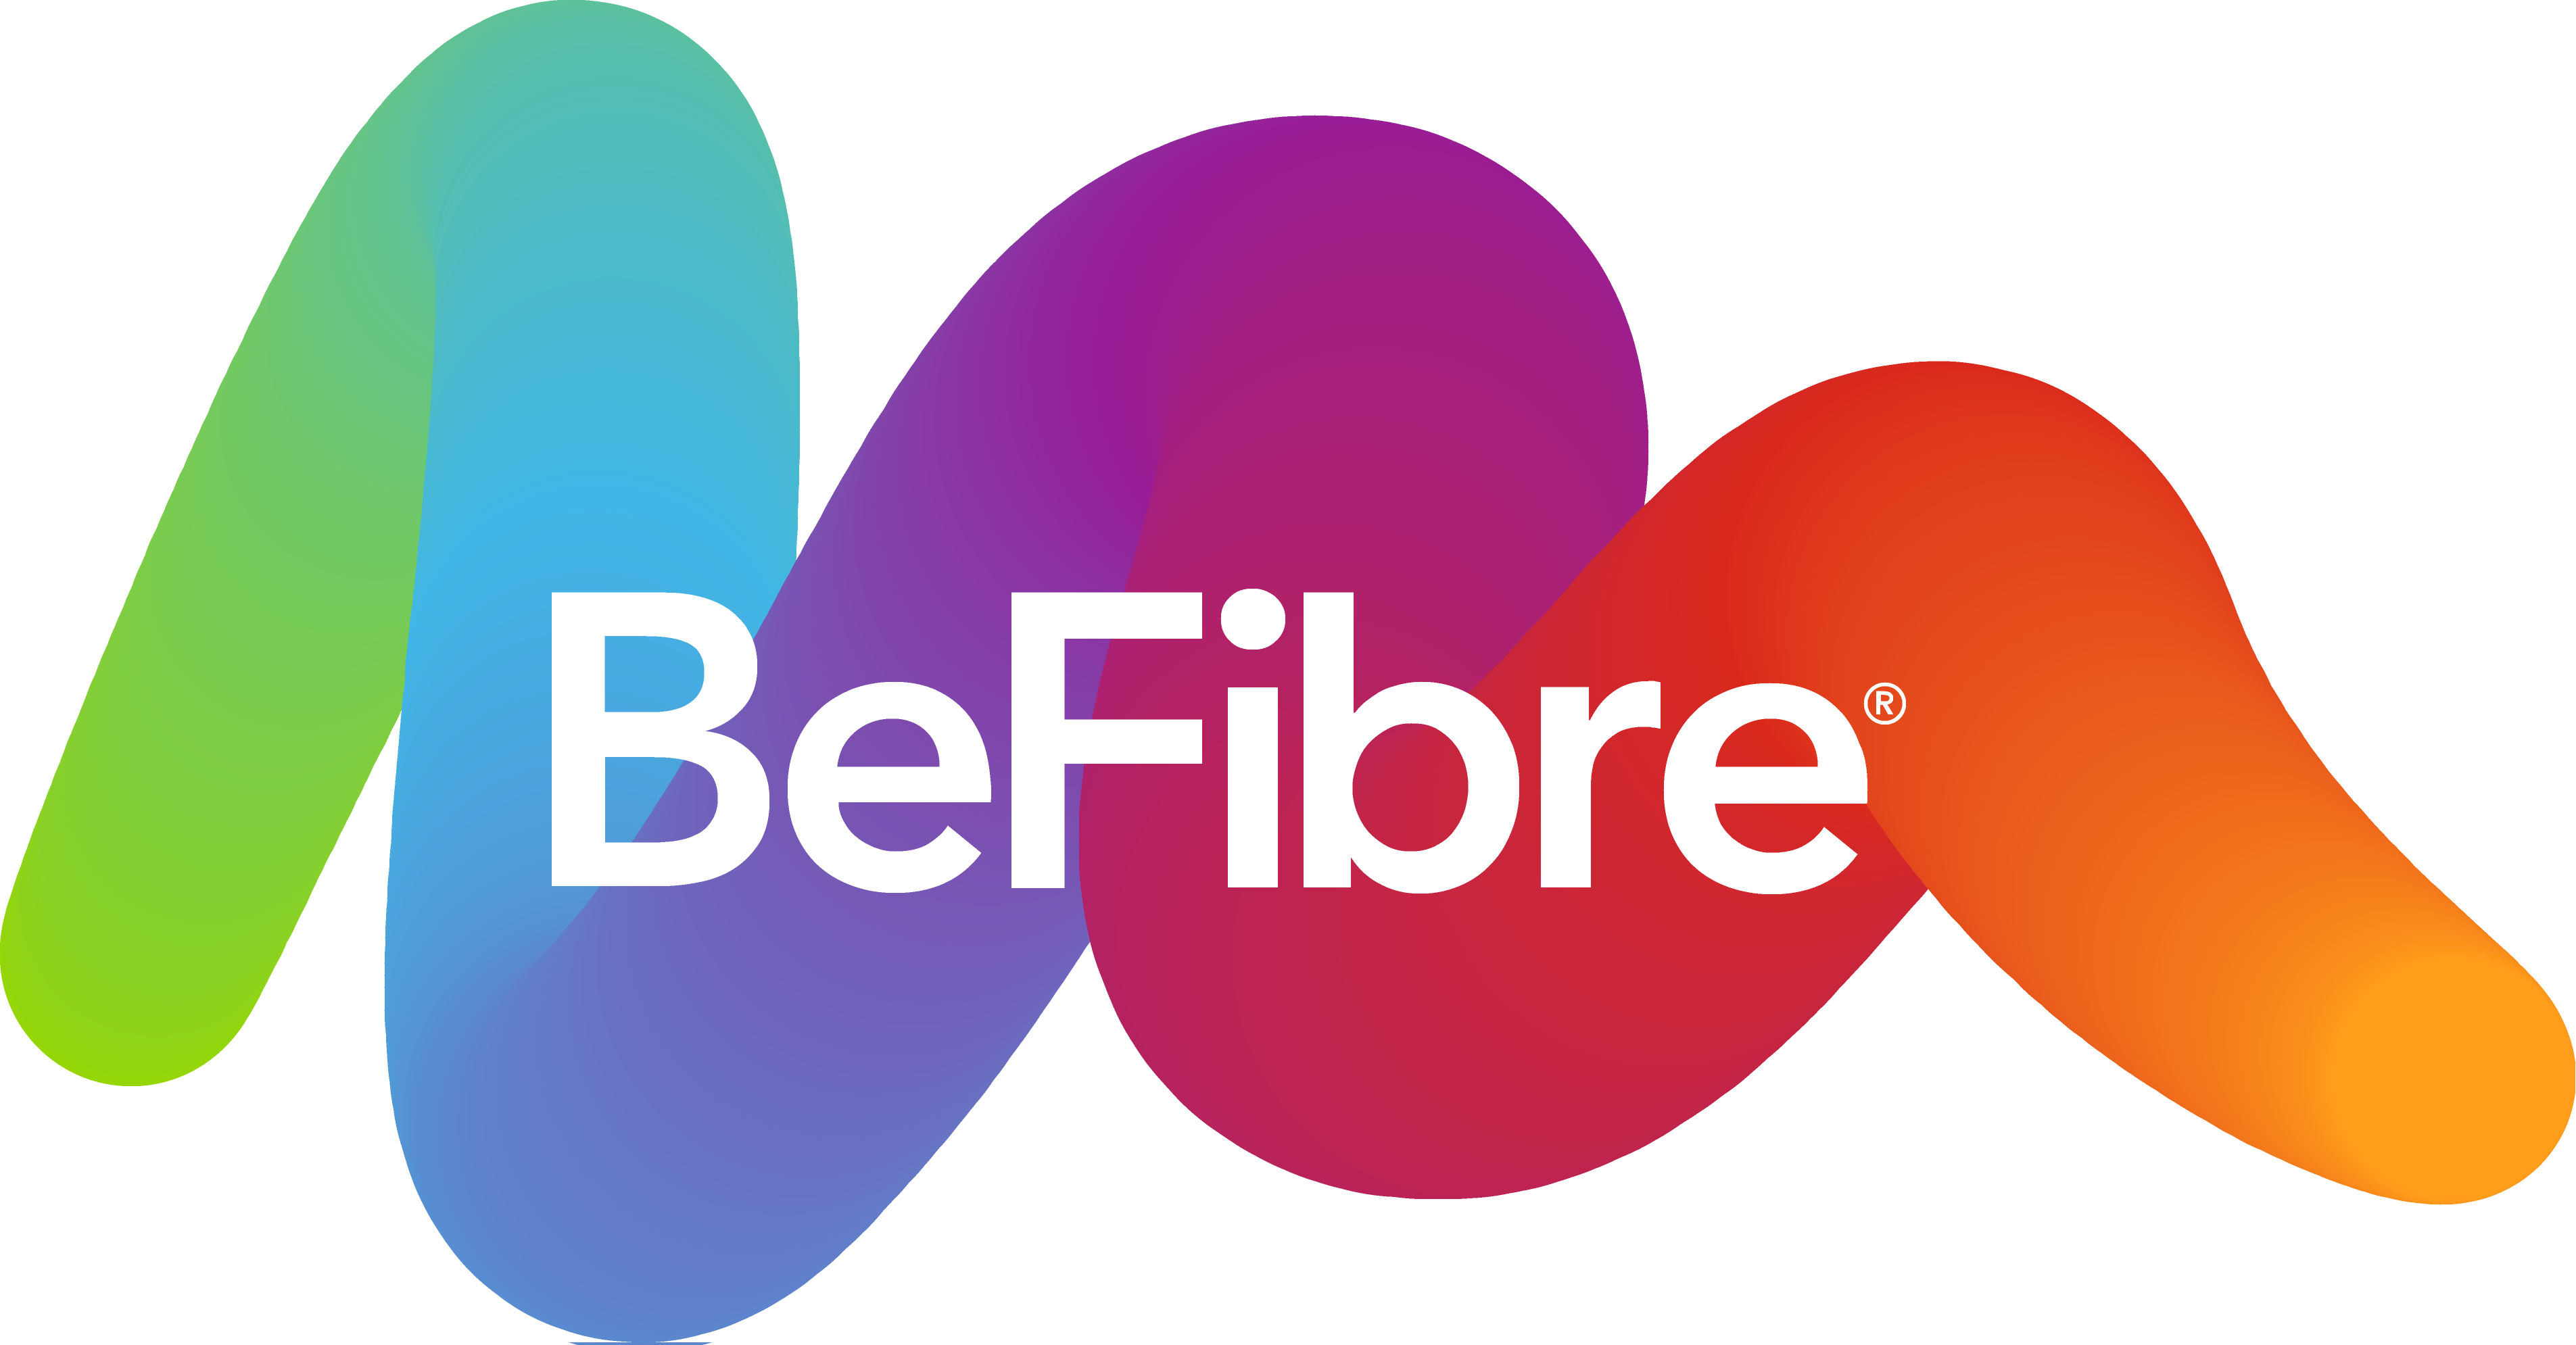 BeFibre broadband offers full fibre broadband to major cities all over the UK including London and Birmingham. Get 900 Mbps download speeds from only £15 per month for 3 months.